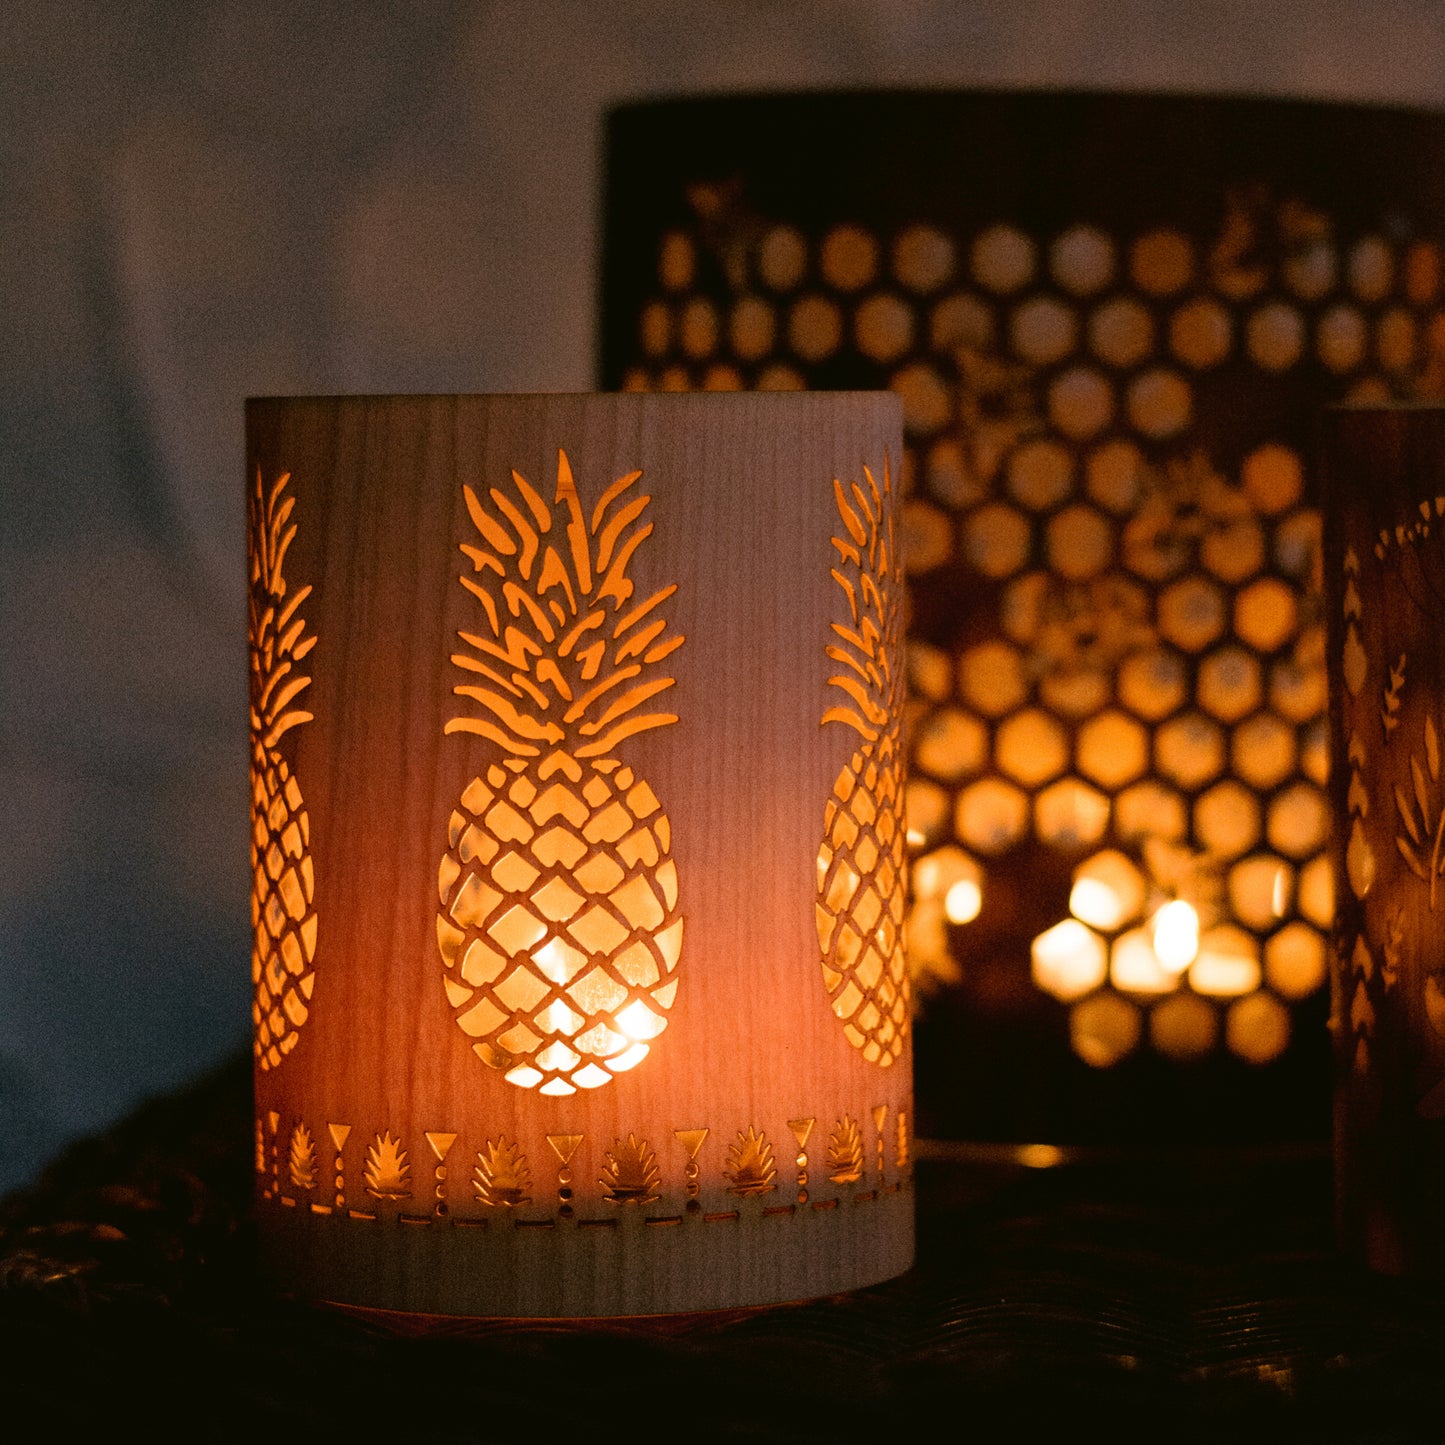 The pineapple lantern - a welcoming tradition in glass and wood-maple,White Oak,or walnut